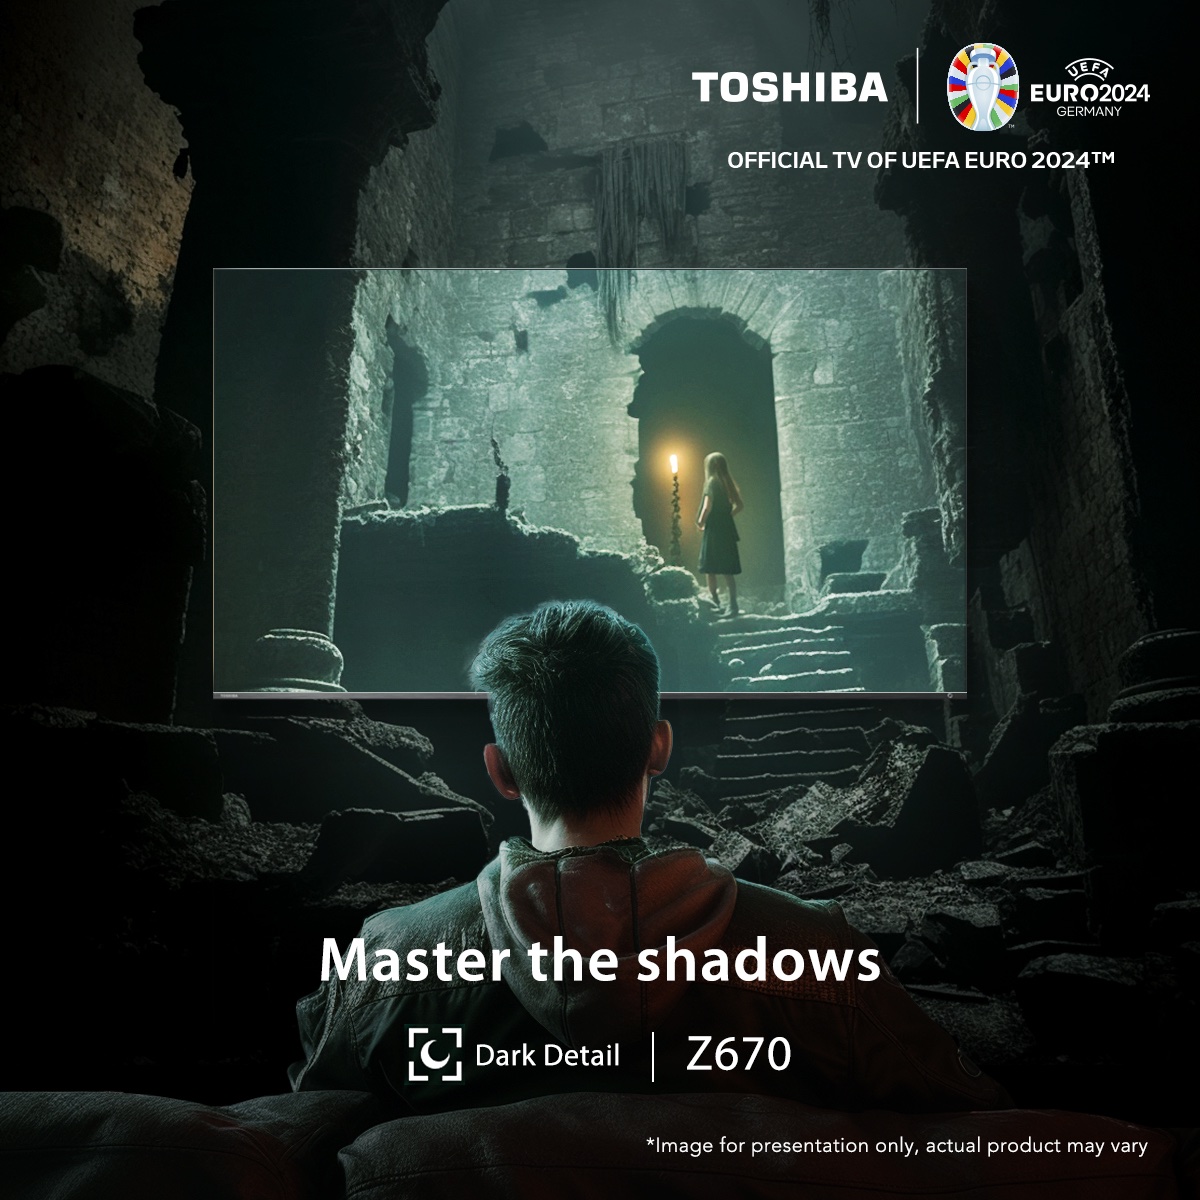 Conquer the darkness with #ToshibaTV Z670 Dark Detail. Spot hidden threats and outmaneuver enemies. What's the toughest game in the dark？ Comment, hit 'Like' if you love a challenge, and follow for top gaming tech. #BeRealCraftsmanship